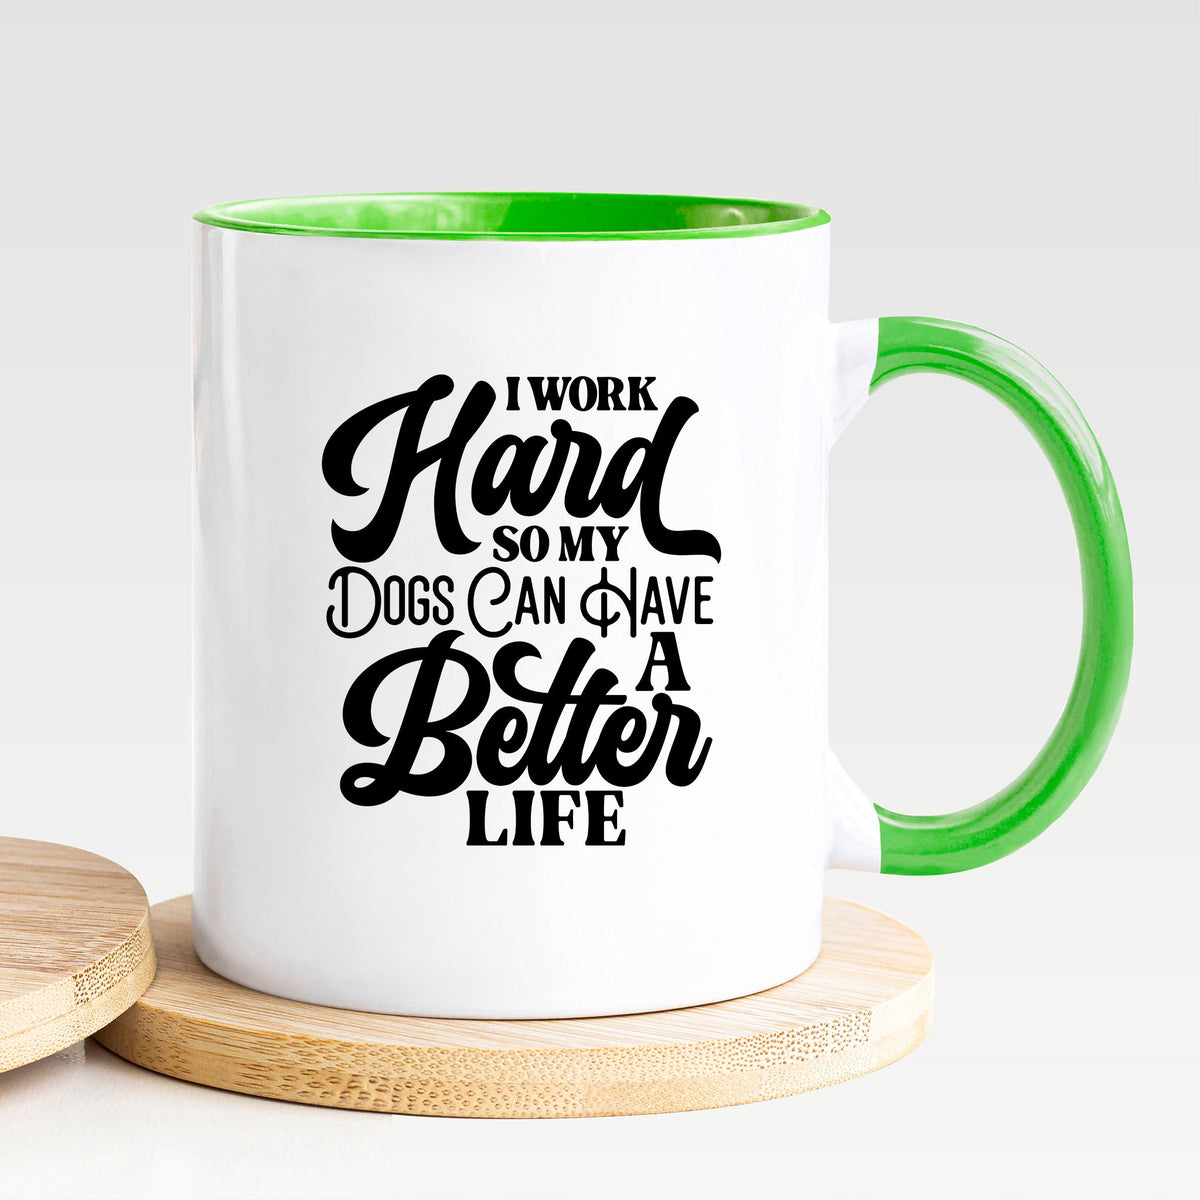 I Work Hard So My Dogs Can Have A Better Life - Mug